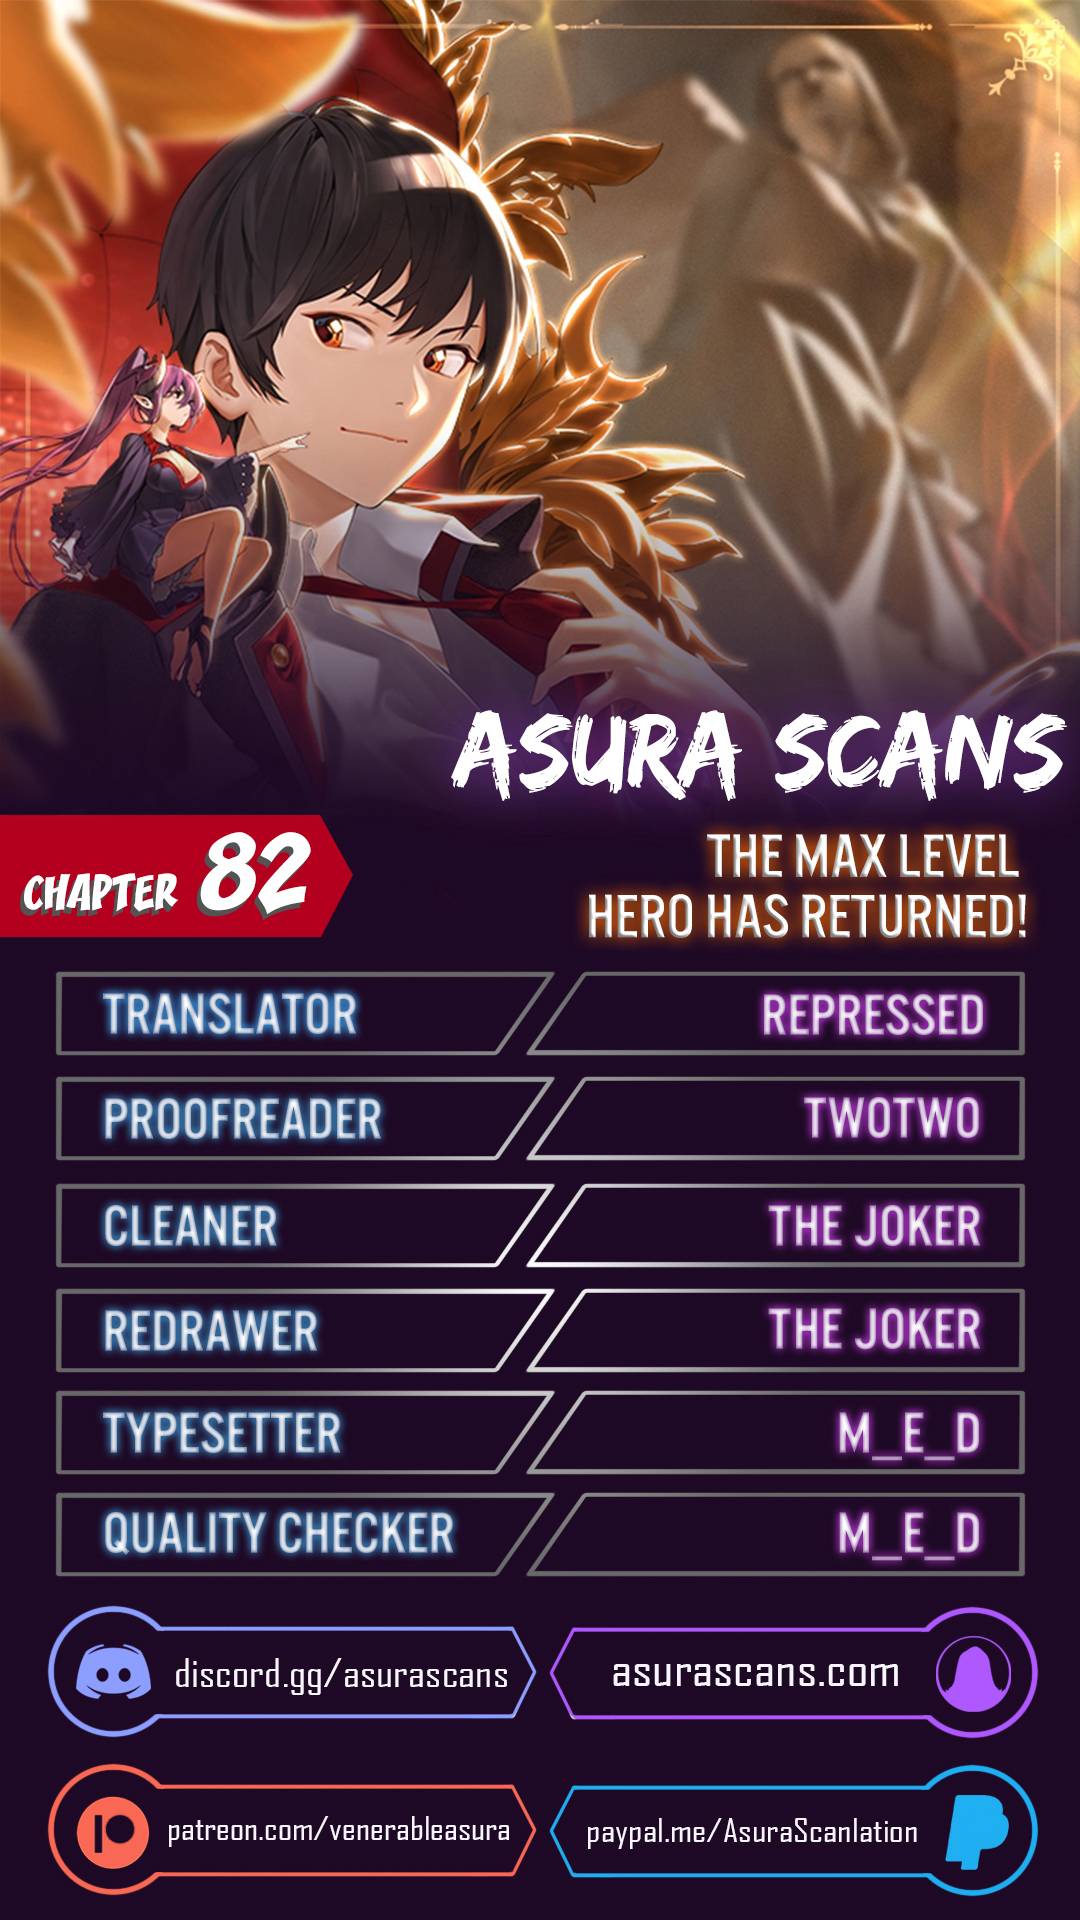 The MAX leveled hero will return! Chapter 82